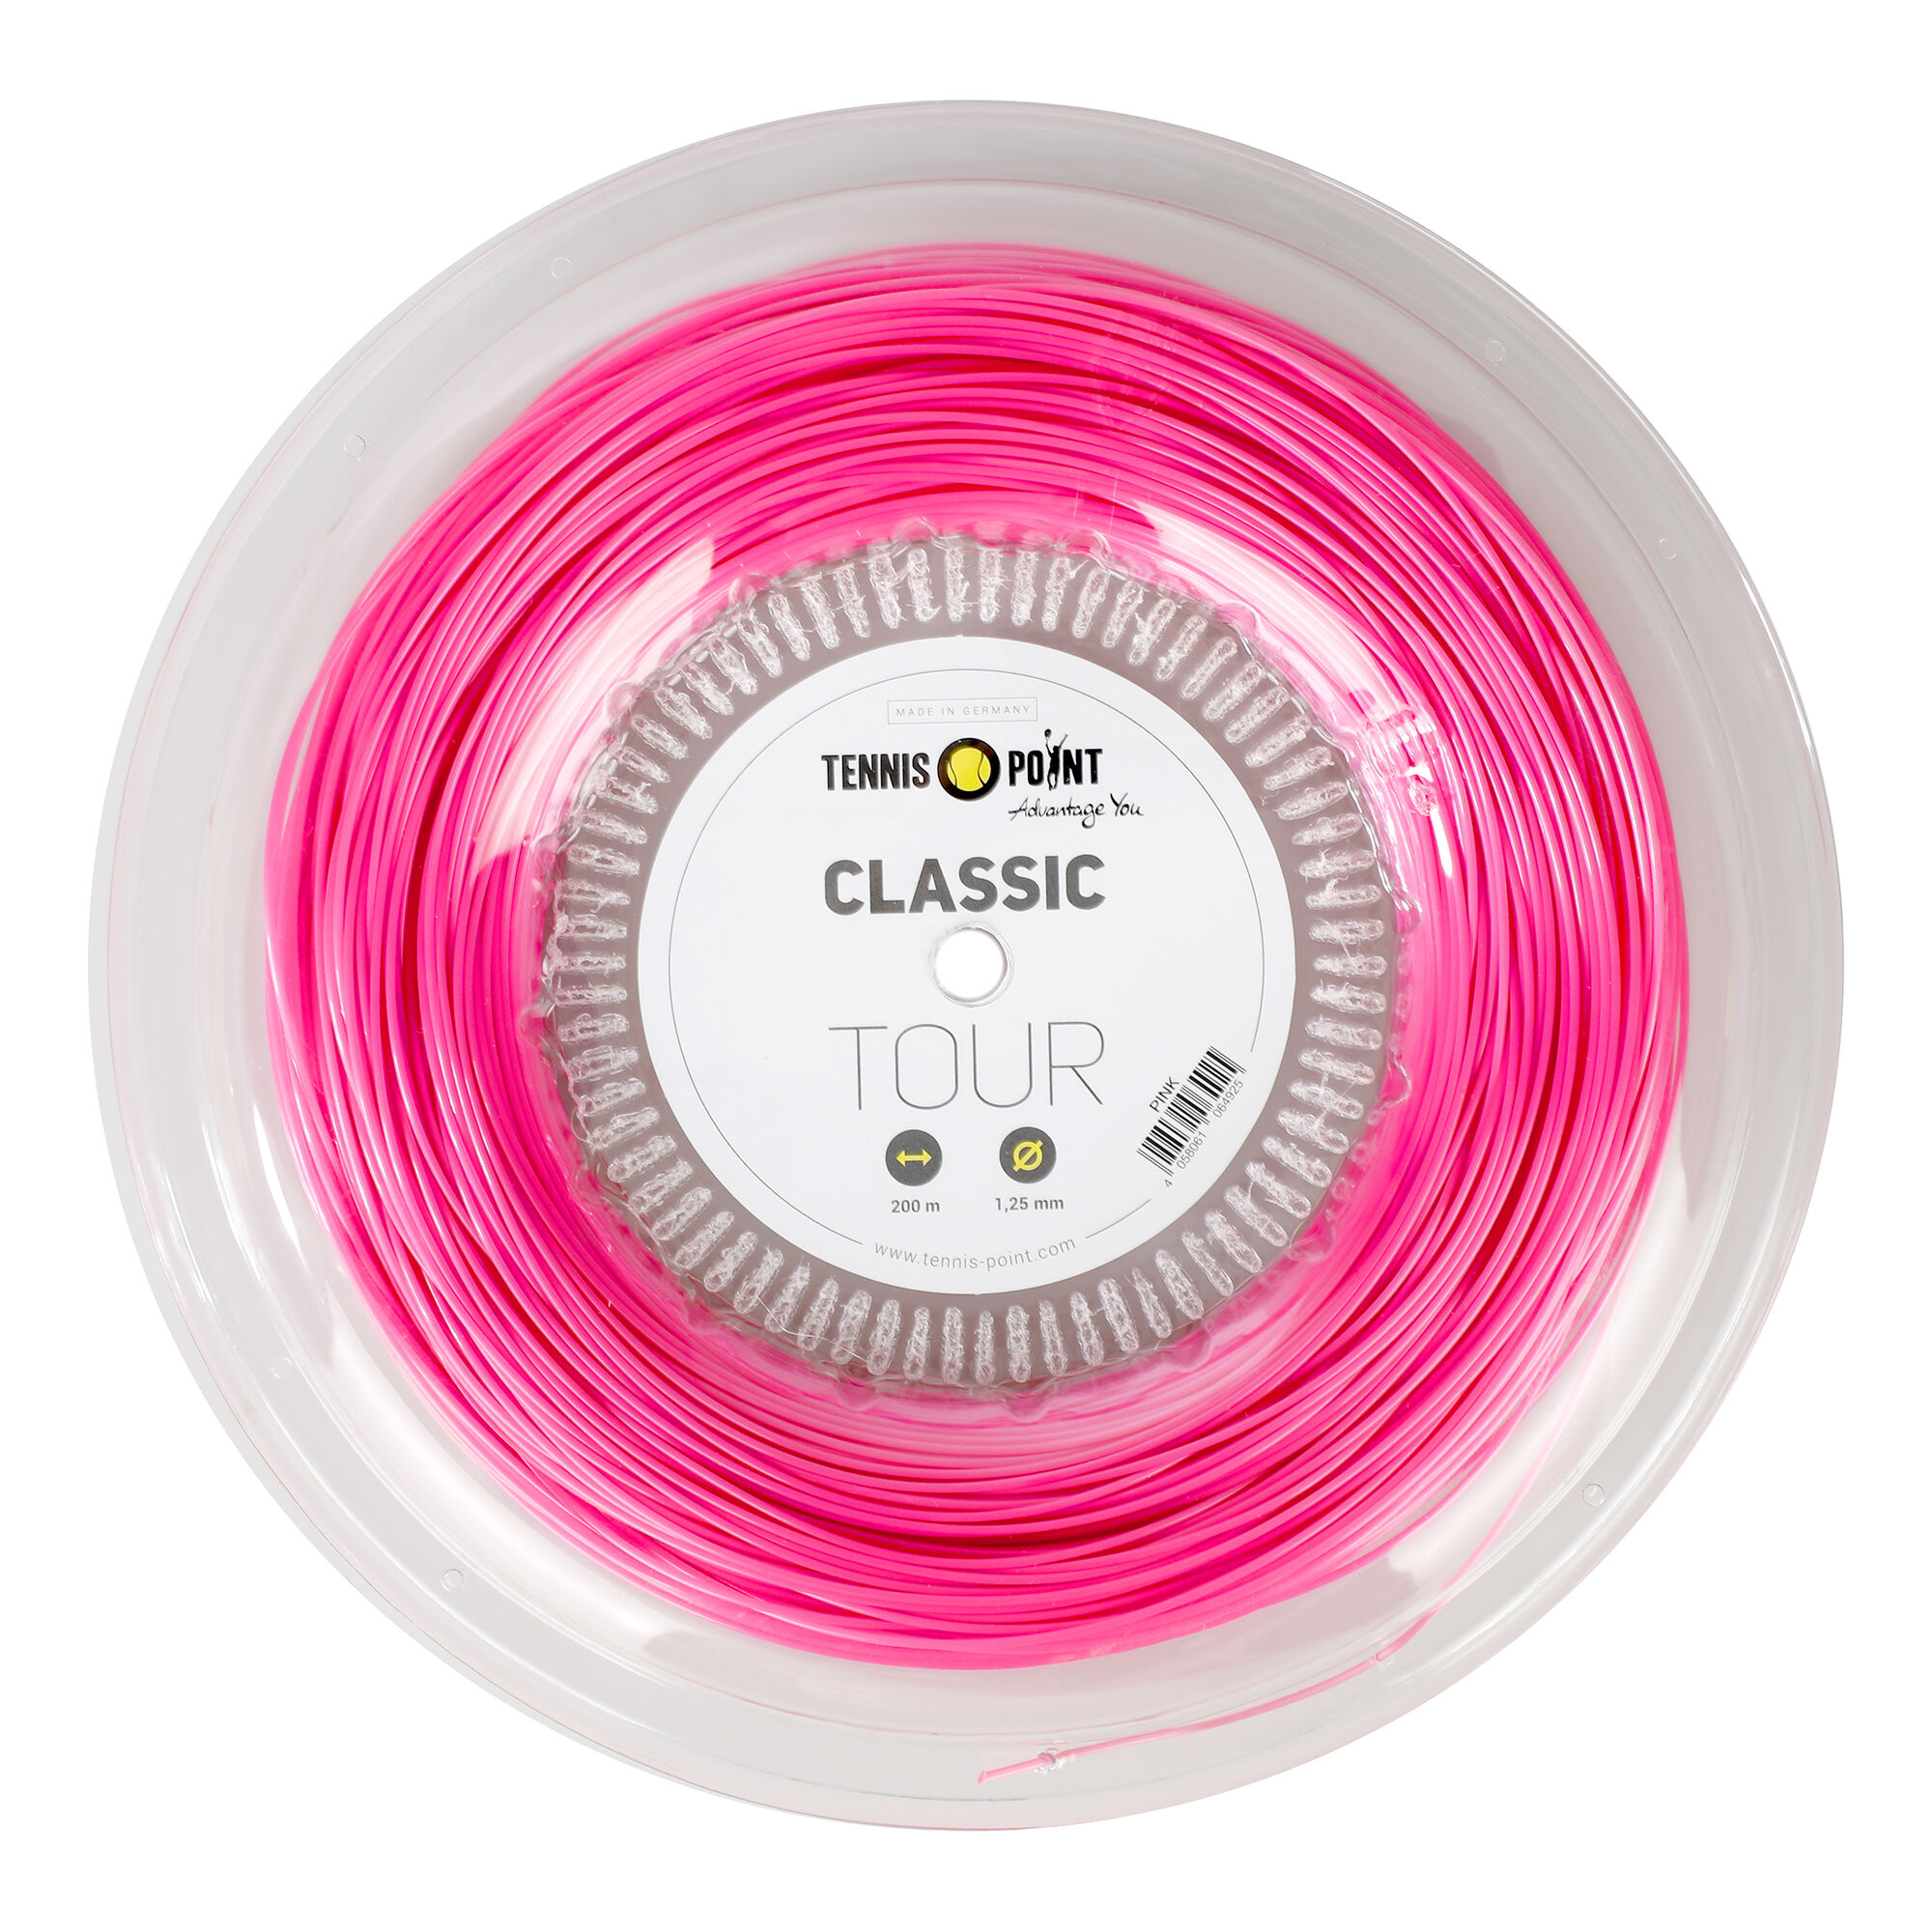 Buy Tennis-Point Classic Tour String Reel 200m Pink online